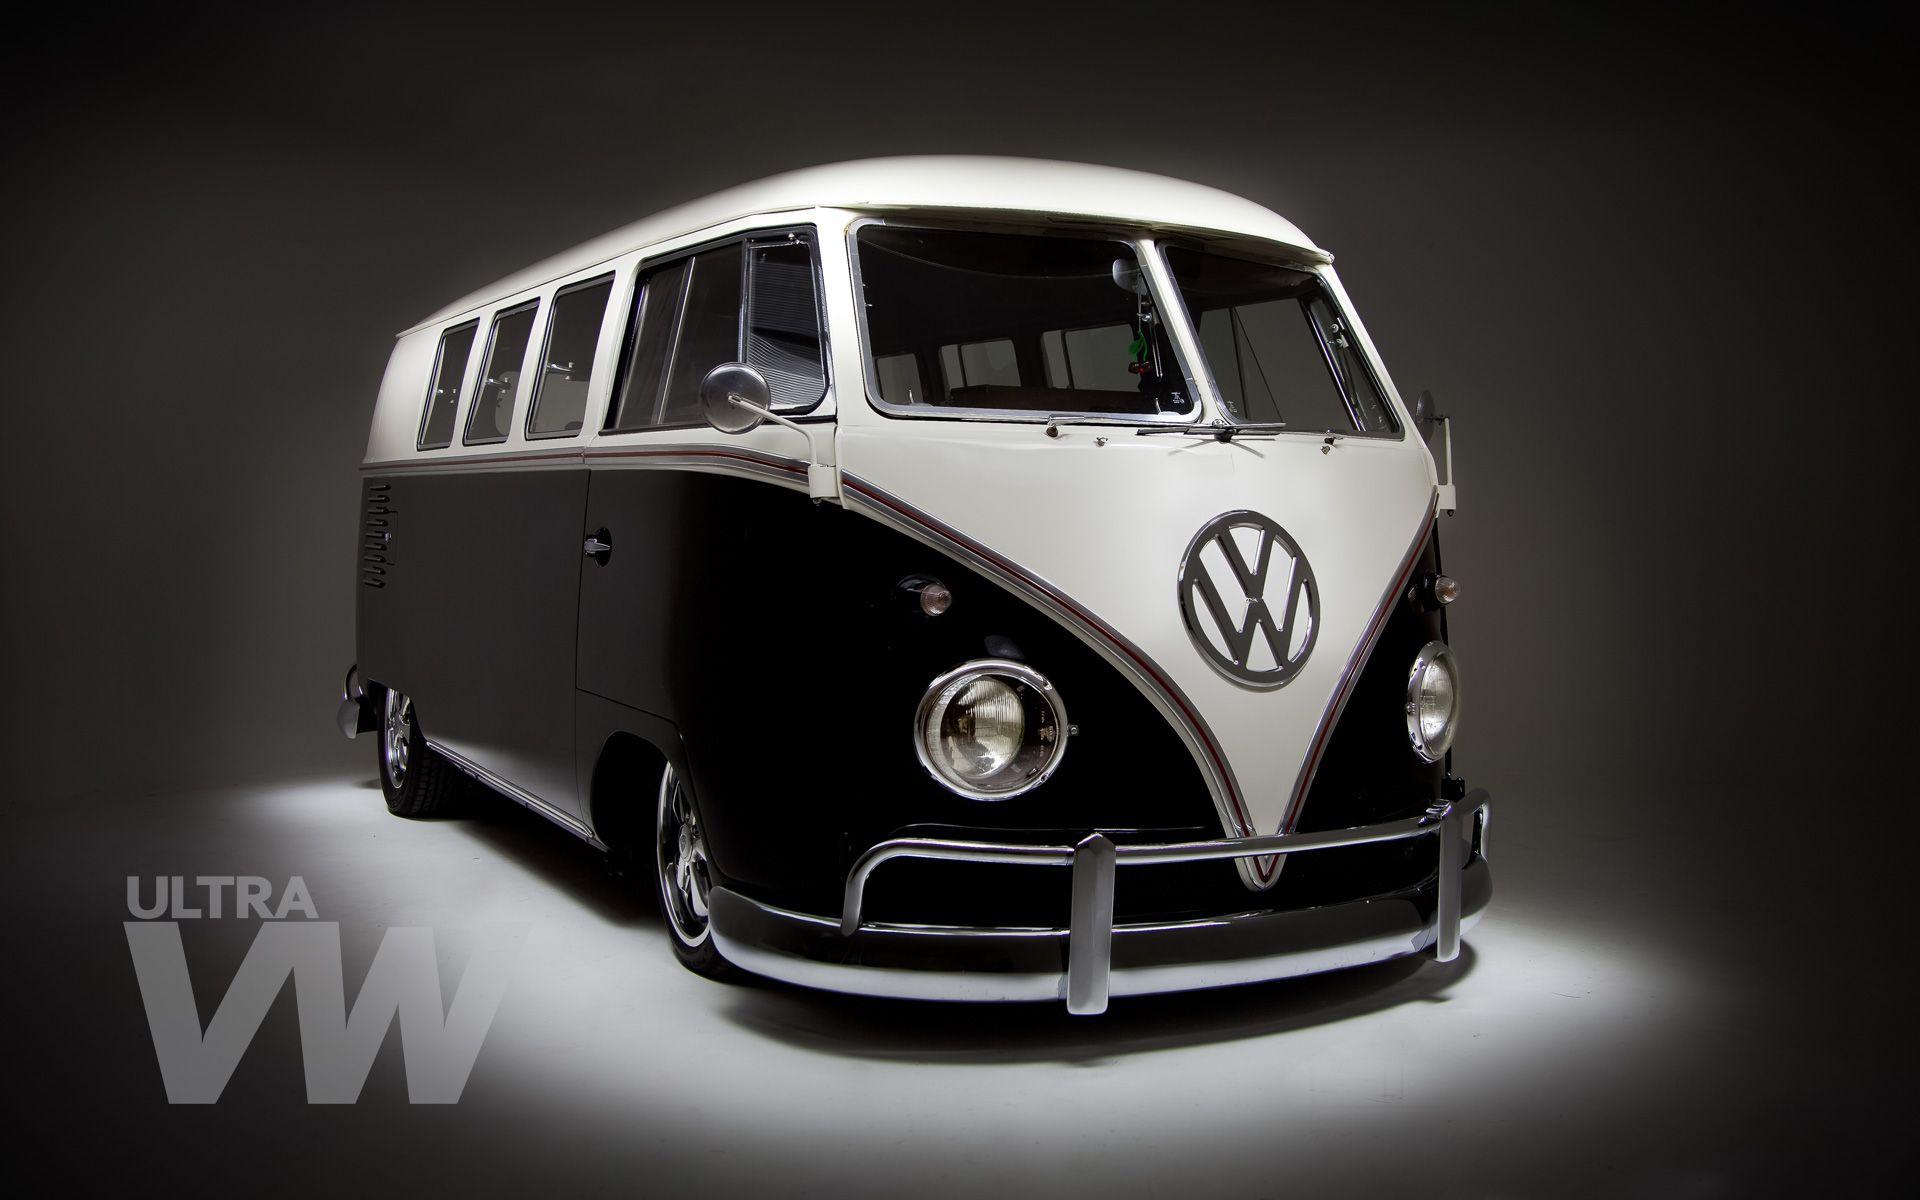 The Ultra VW Random VW Related Action Blog!: Download Awesome Ultra